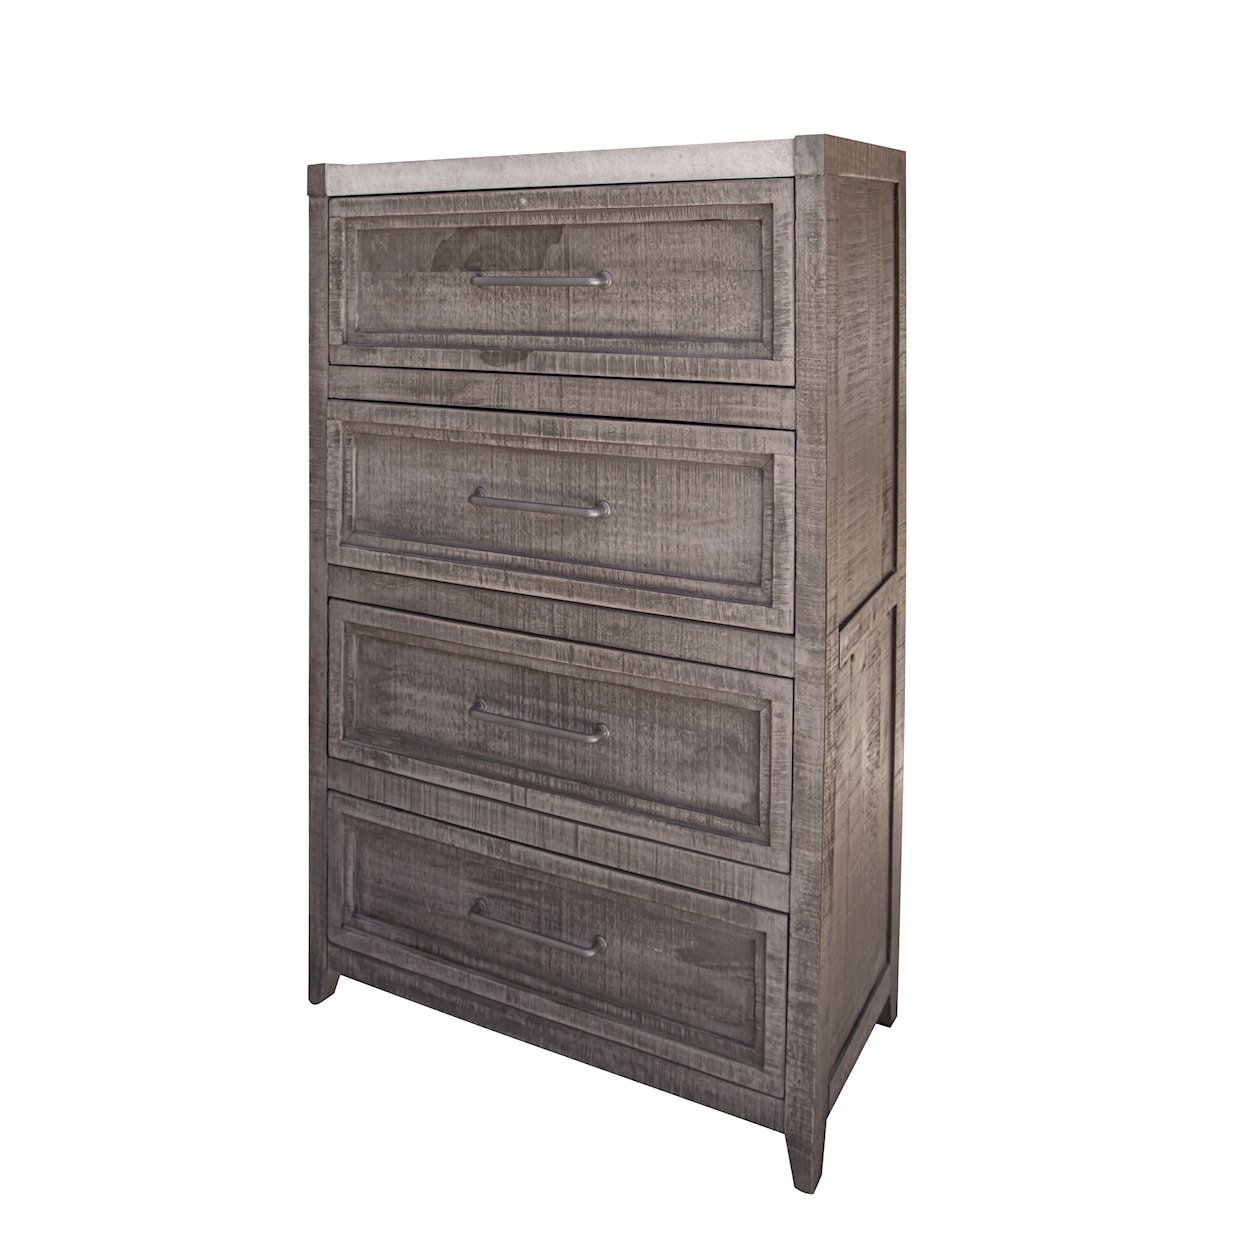 IFD International Furniture Direct Marble Chest